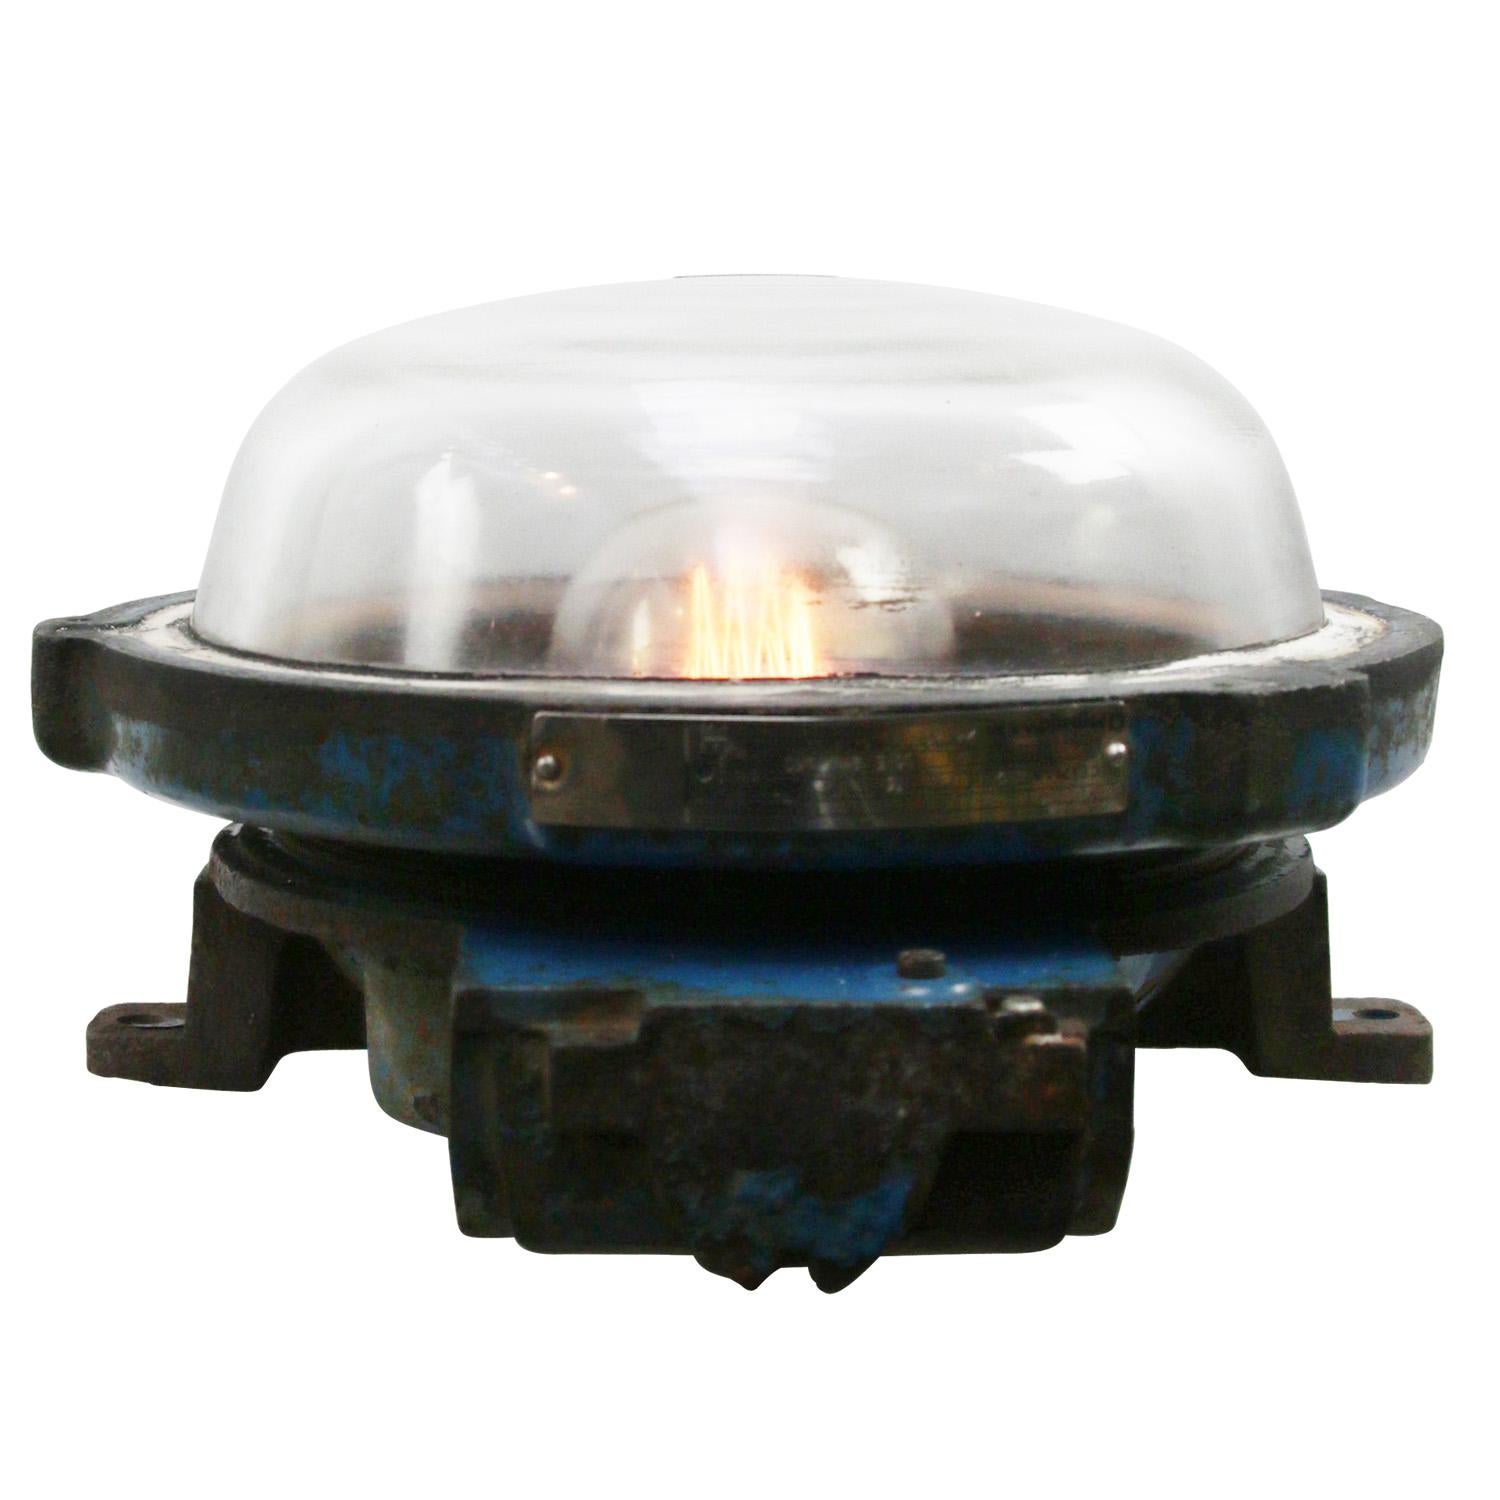 French Industrial wall / ceiling lamp by Mapelec Amiens, France
Blue cast iron with clear glass.

Weight: 14.50 kg / 32 lb

Priced per individual item. All lamps have been made suitable by international standards for incandescent light bulbs,